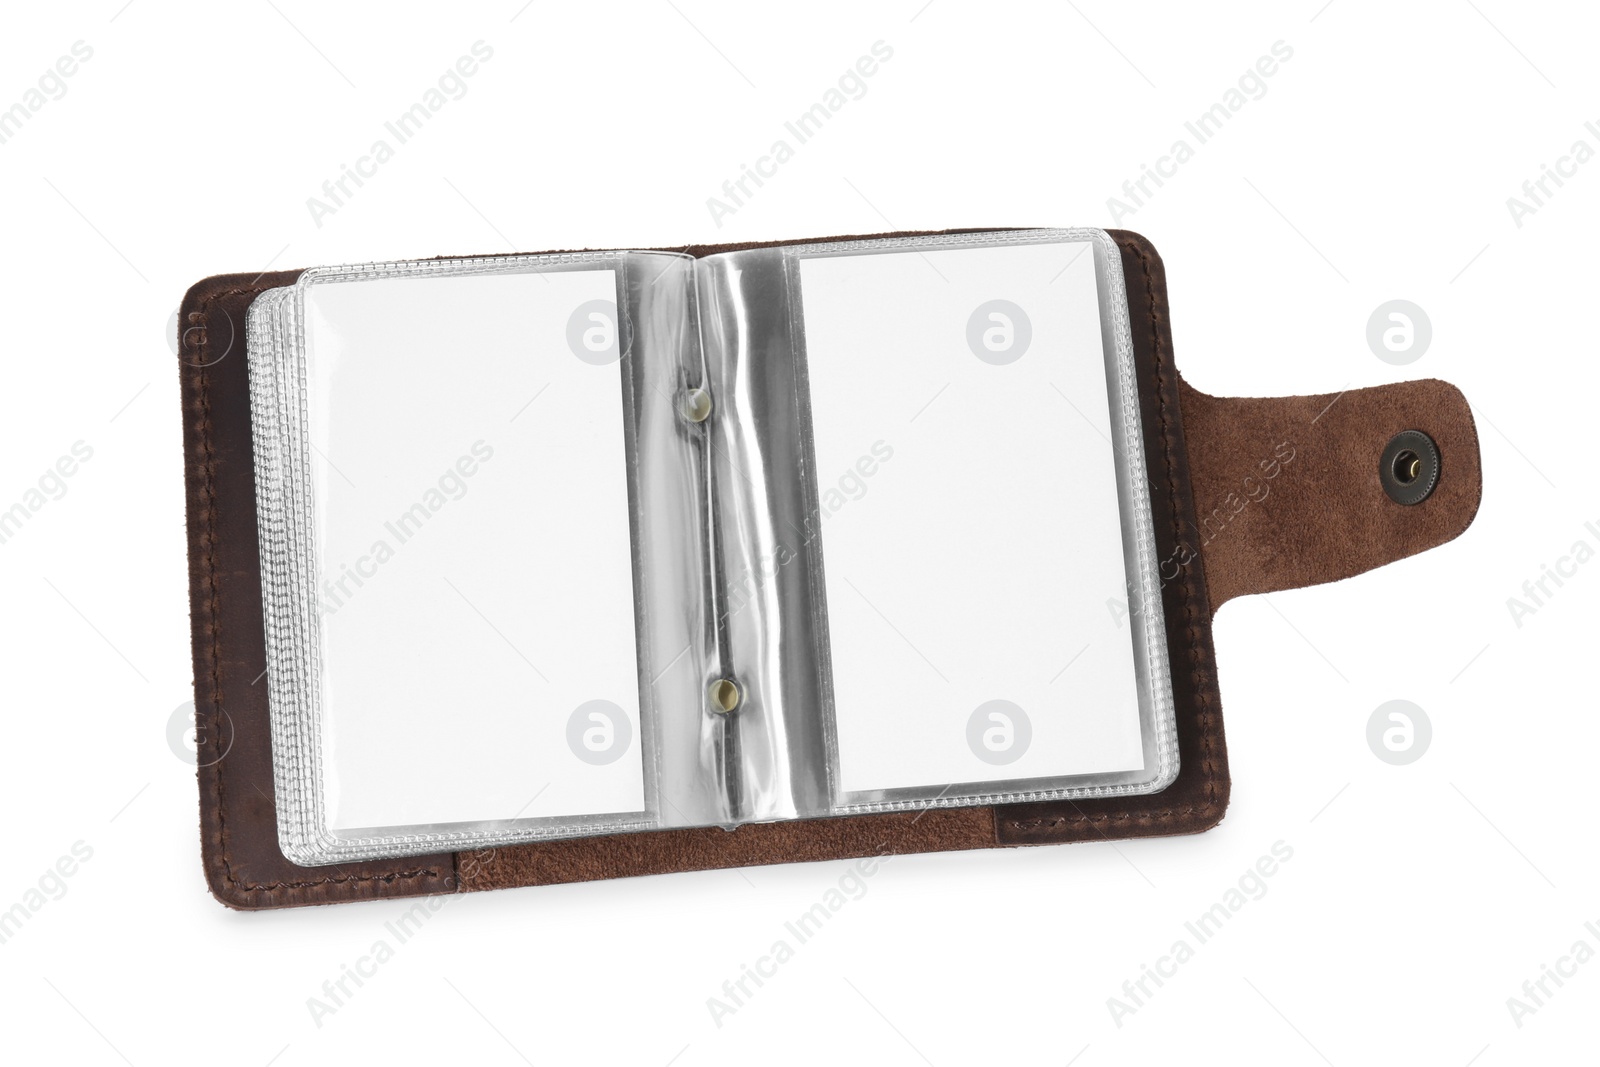 Photo of Leather business card holder with blank cards isolated on white